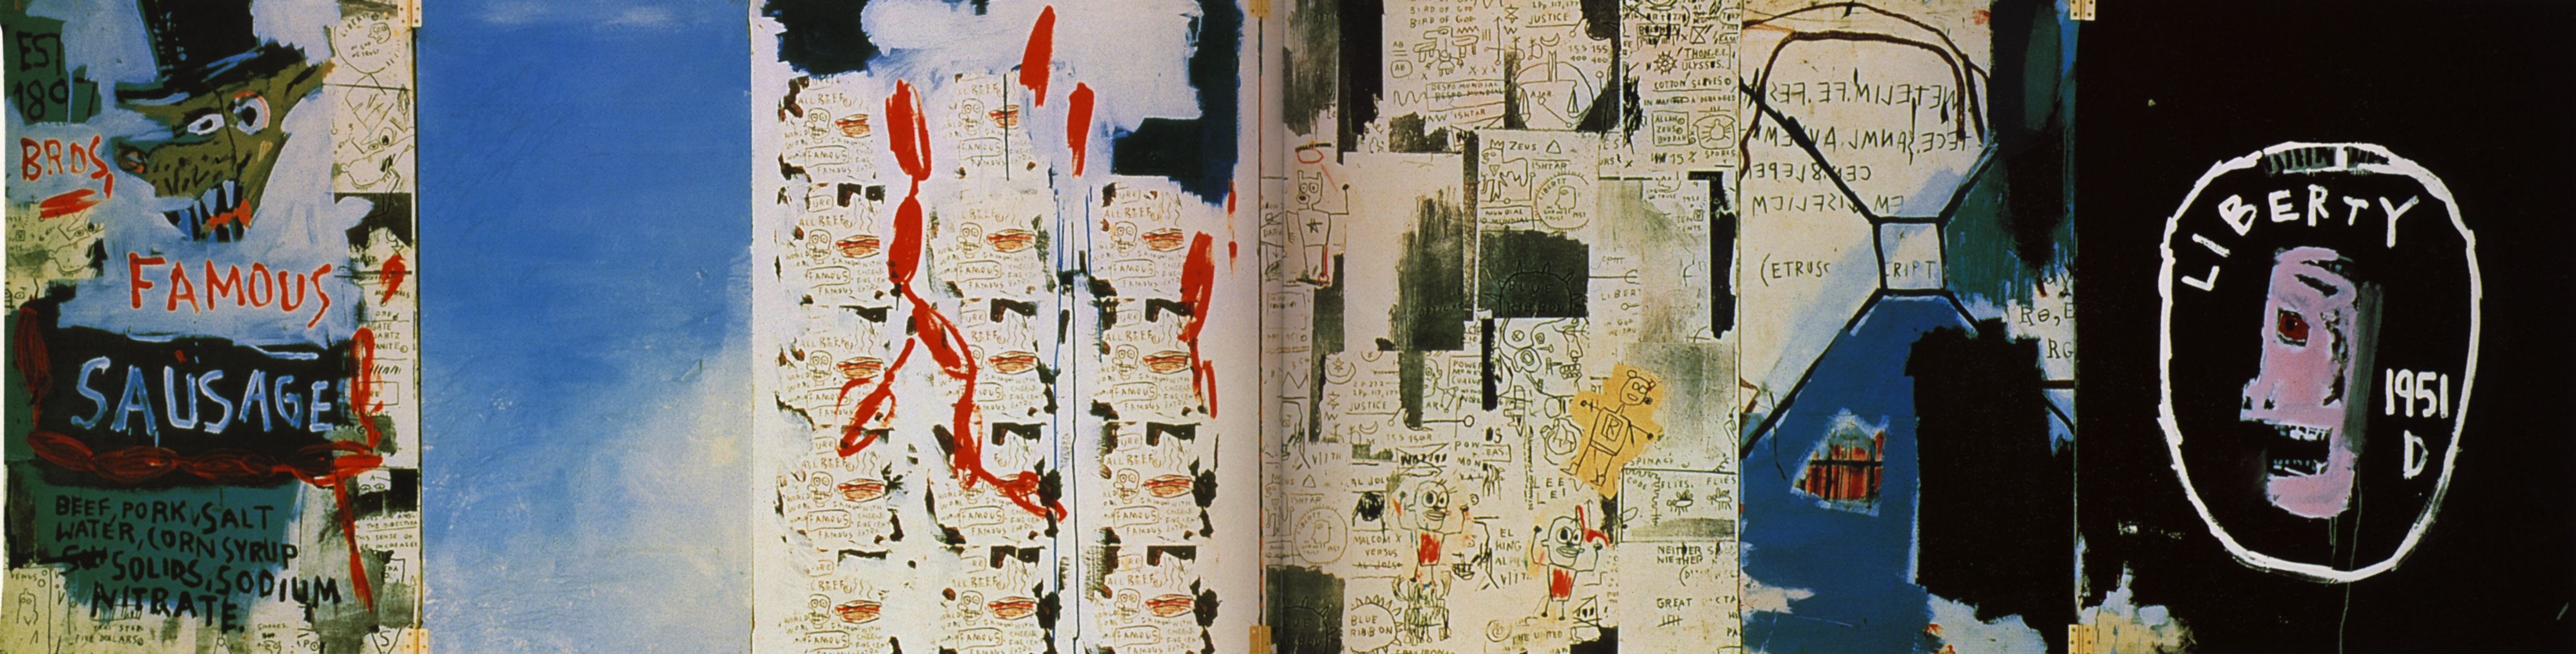 Brother's Sausage, 1983 - Jean-Michel Basquiat - WikiArt.org